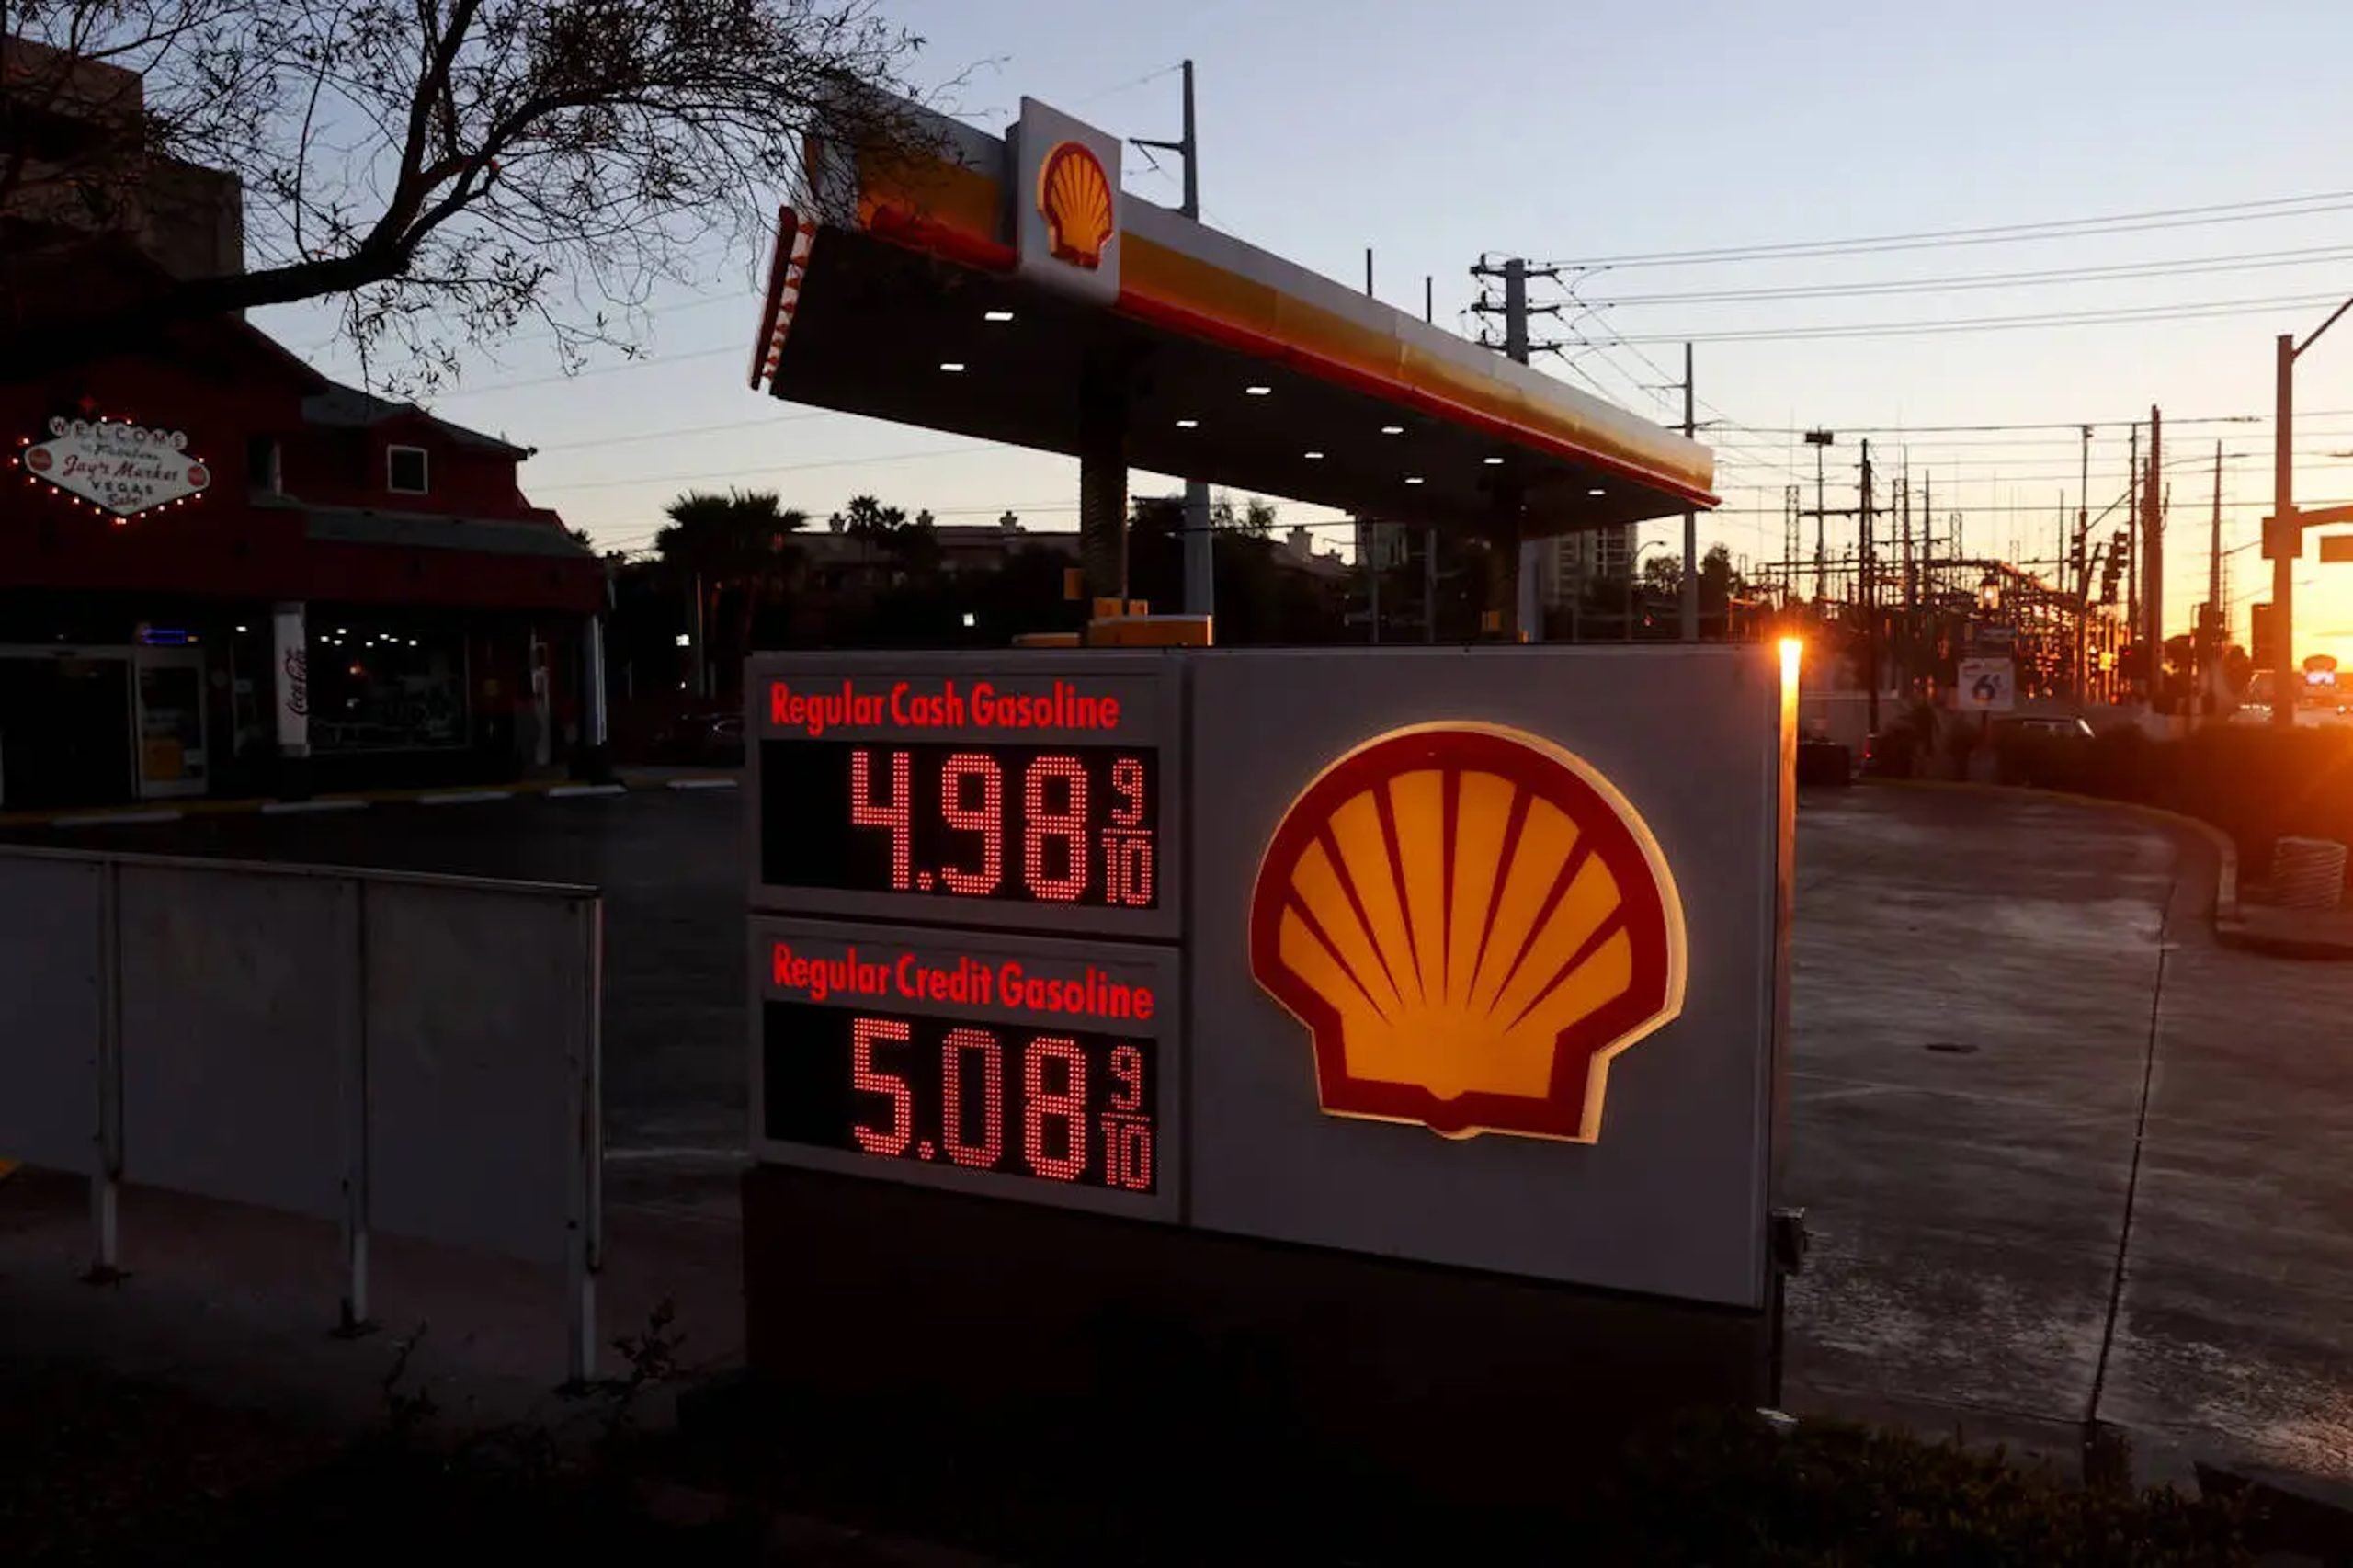 the US average gasoline price set a record of $4.10 a gallon on Monday